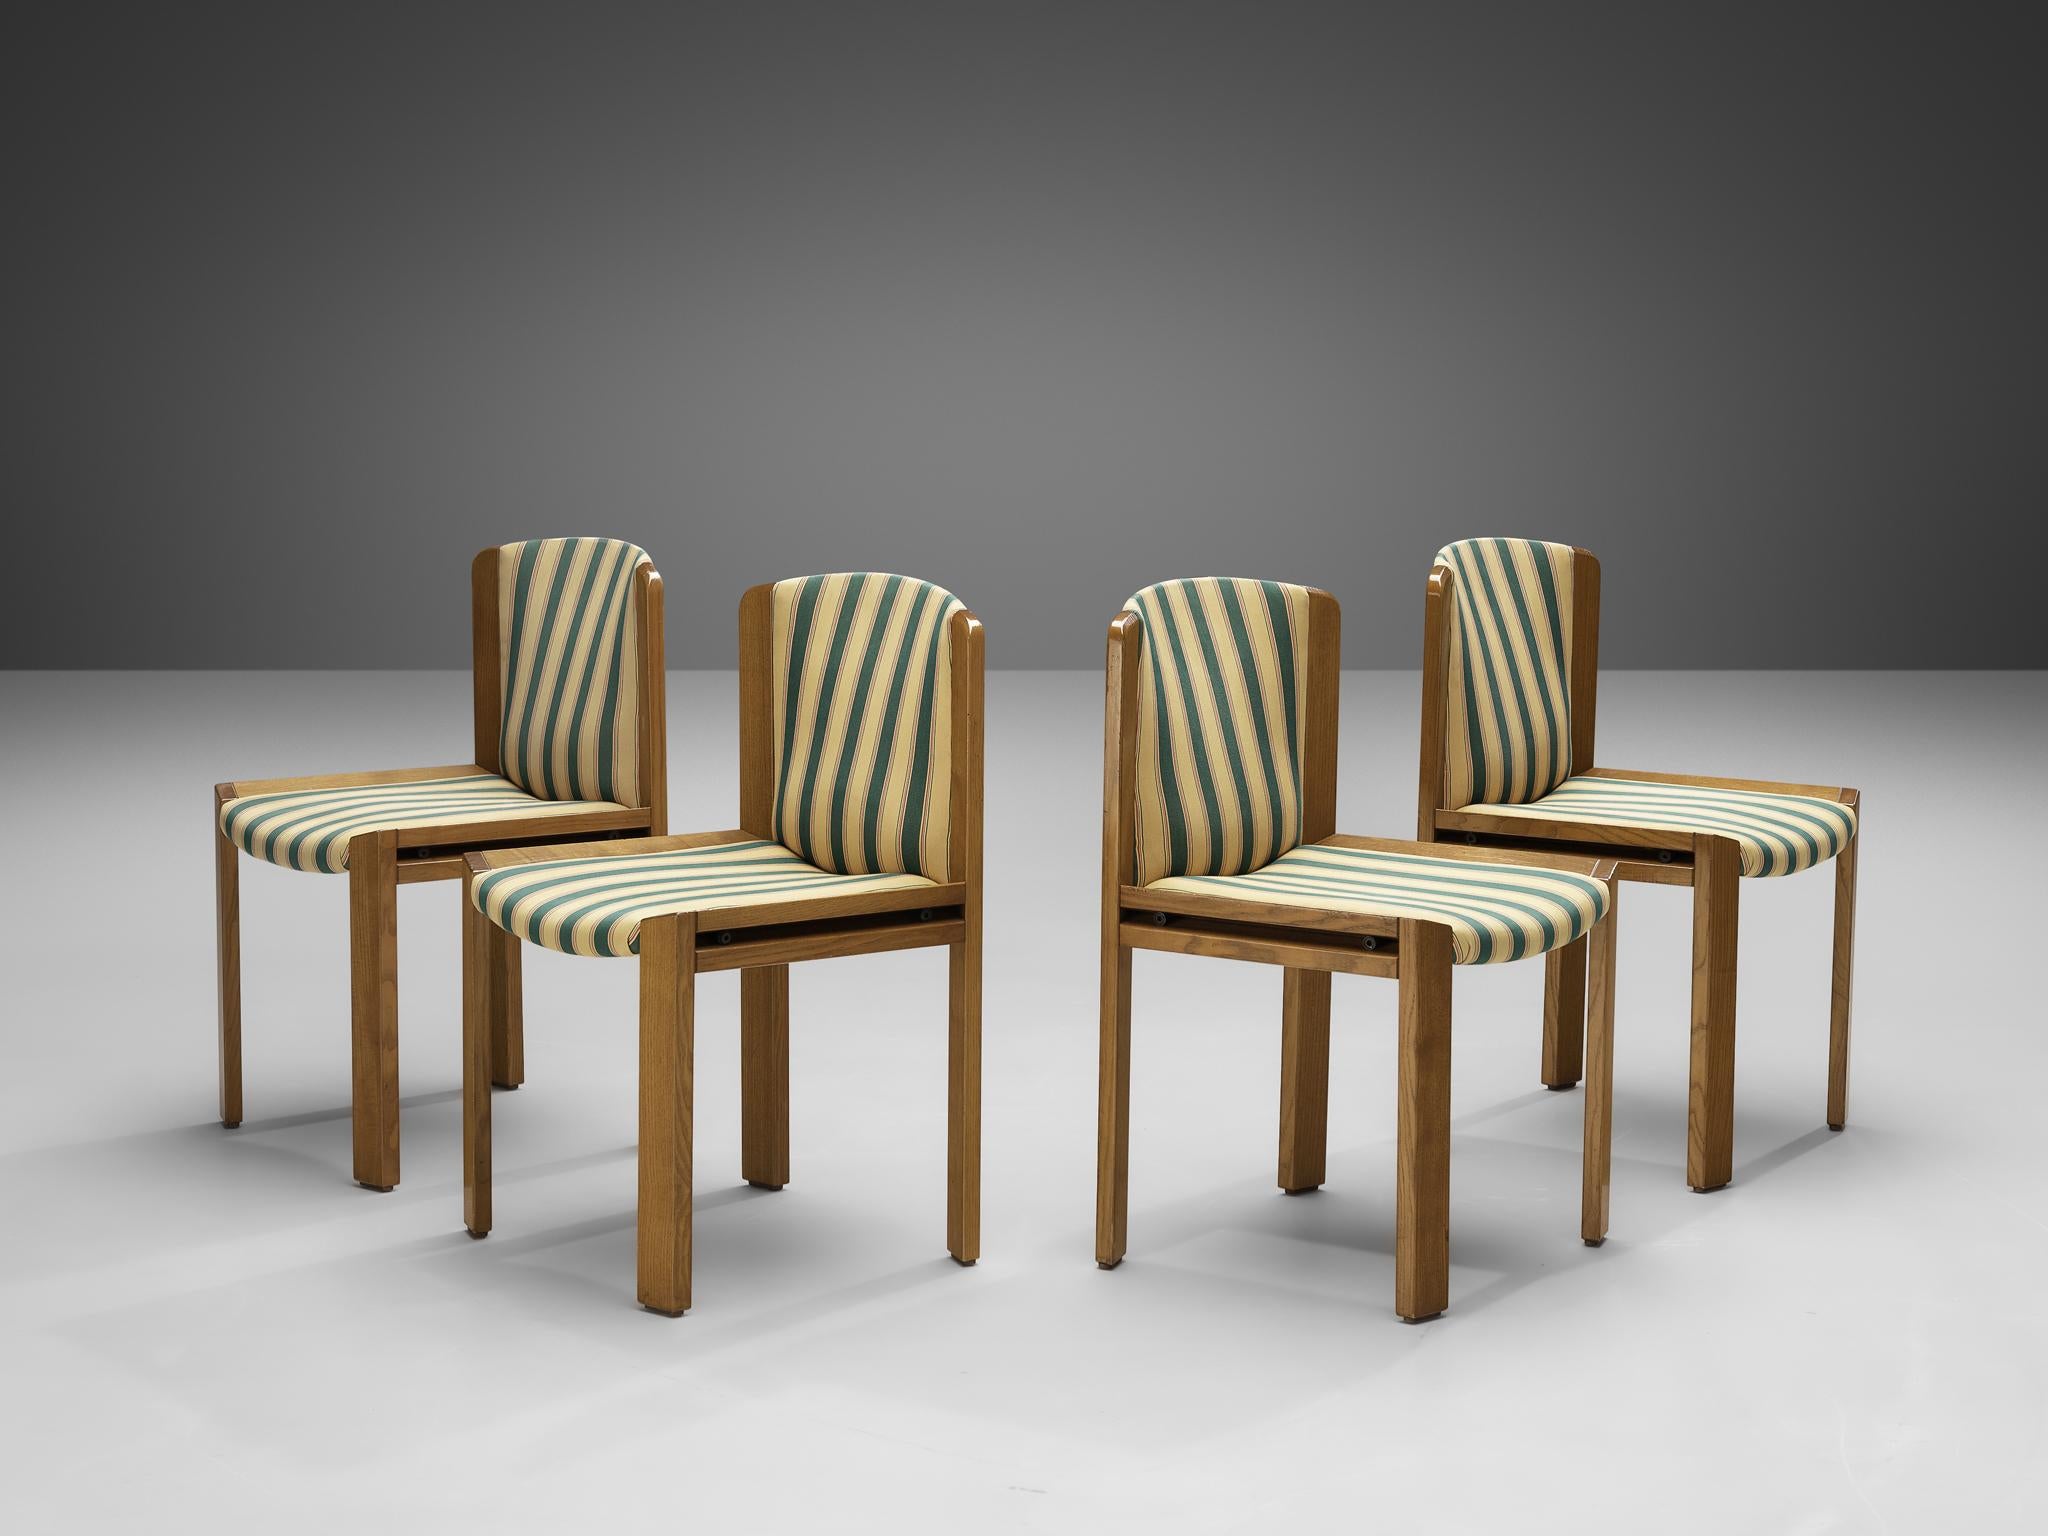 Fabric Joe Colombo for Pozzi Set of Four '300' Dining Chairs in Striped Upholstery